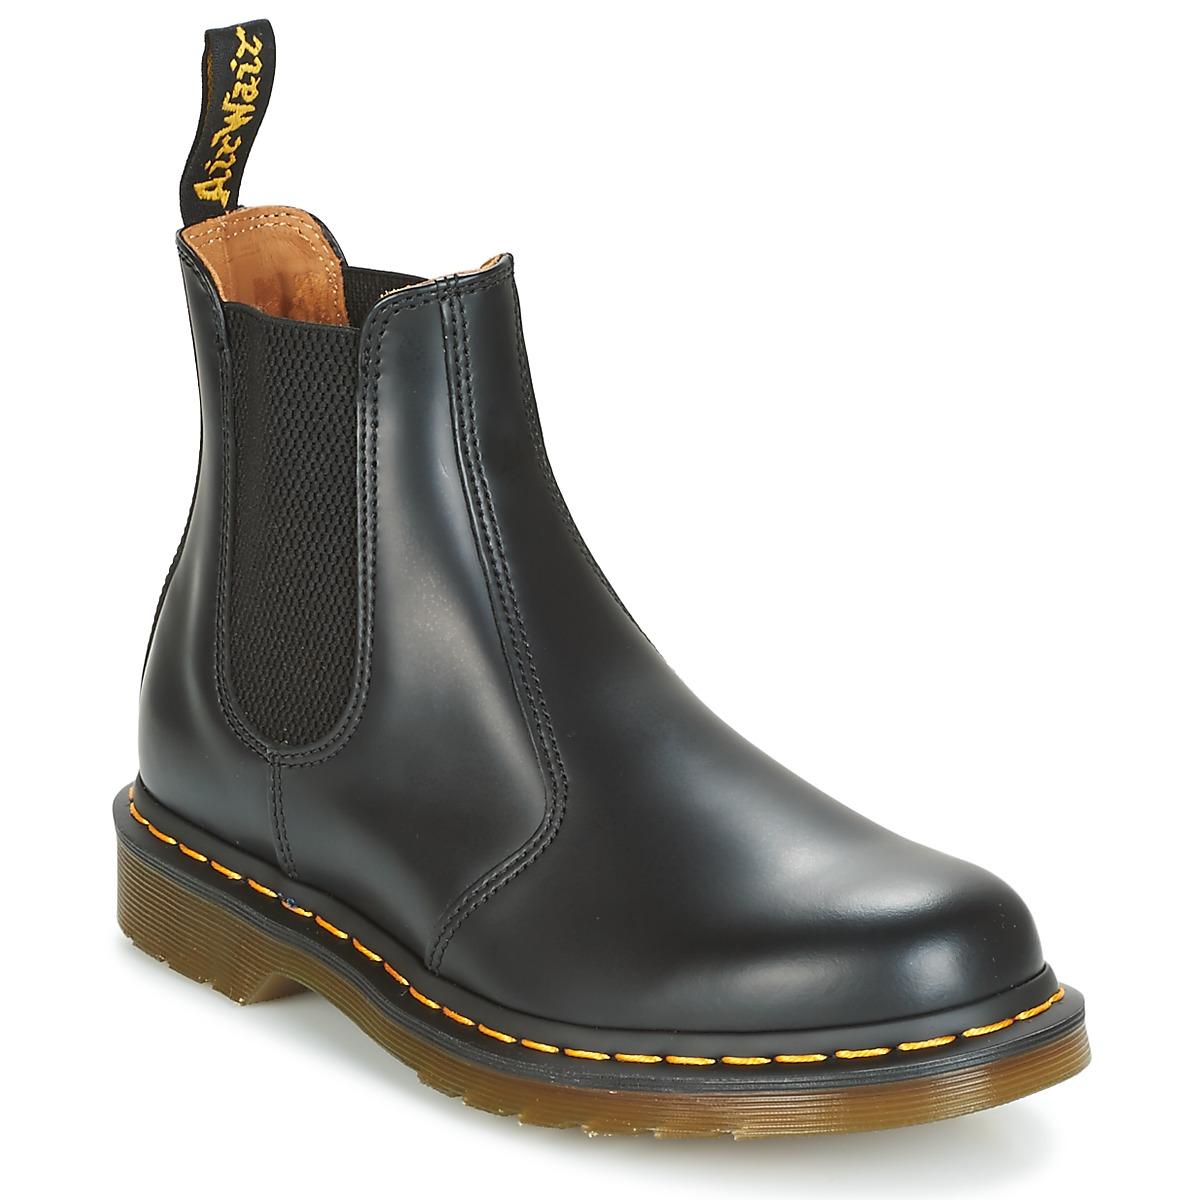 Dr. Martens 2976 Leonore Mid Boots in Black - Save 15% - Lyst